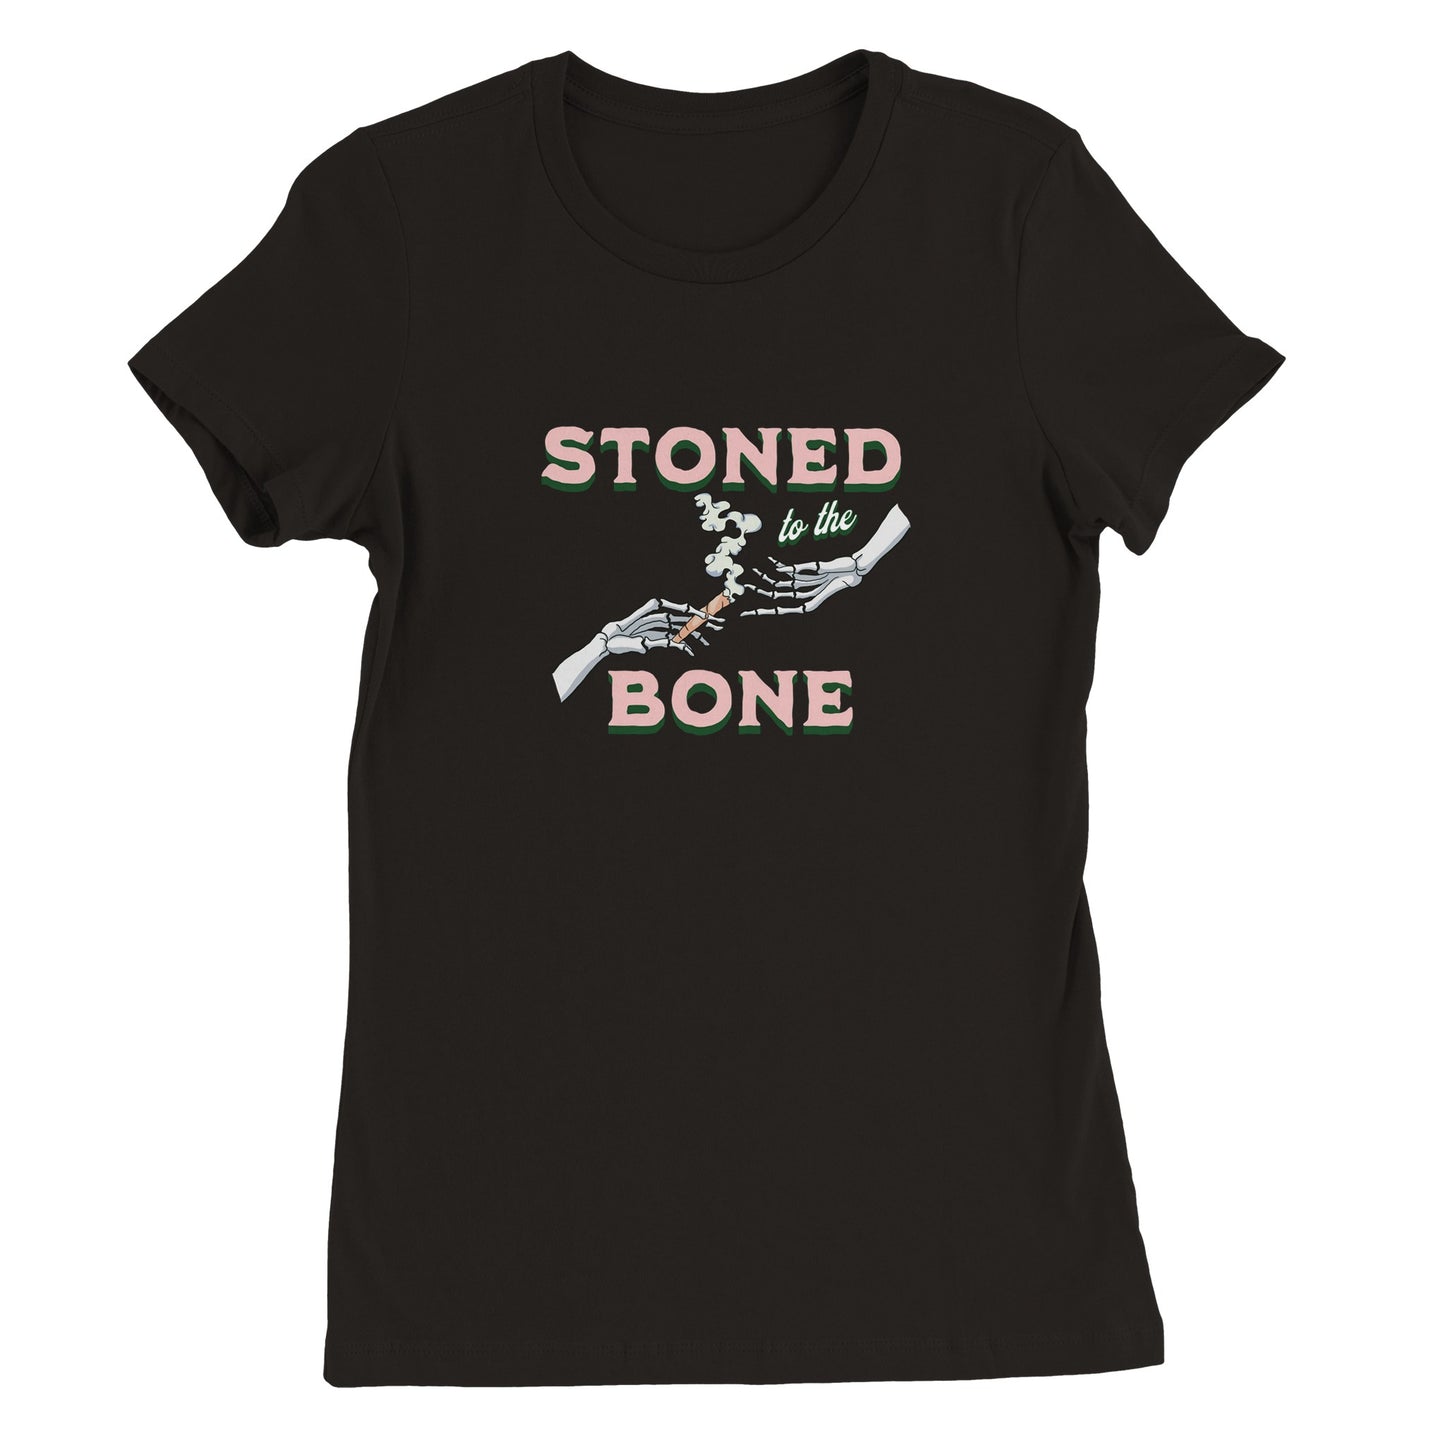 Stoned to the Bone Fitted Tee